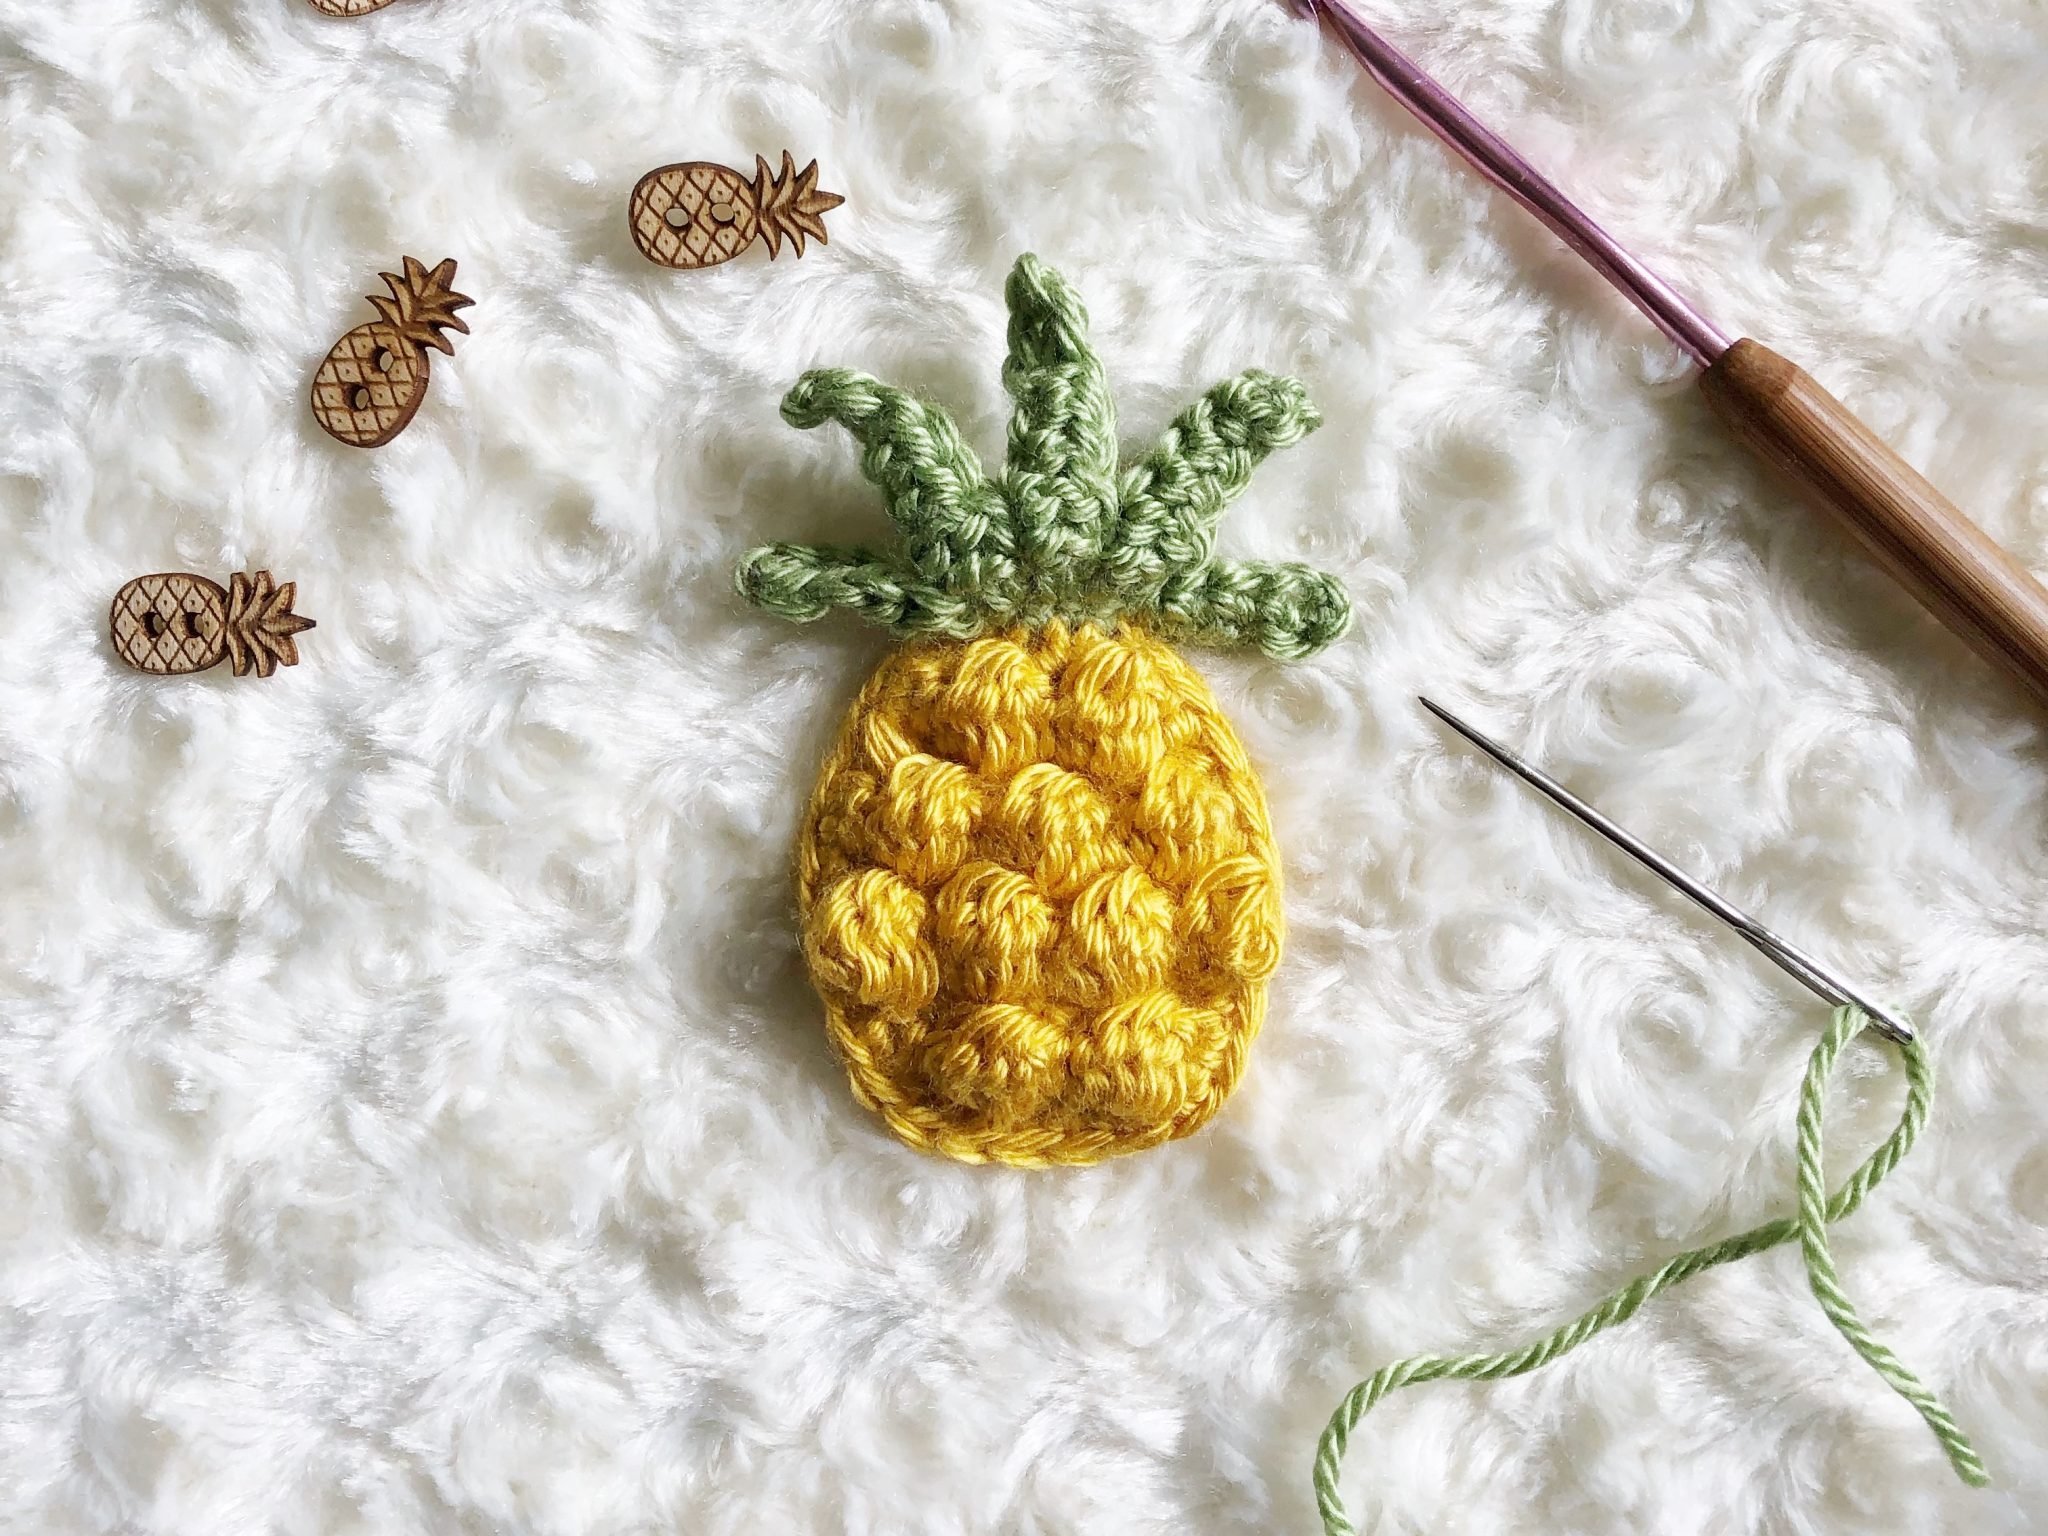 Progress photo for a crocheted pineapple applique'